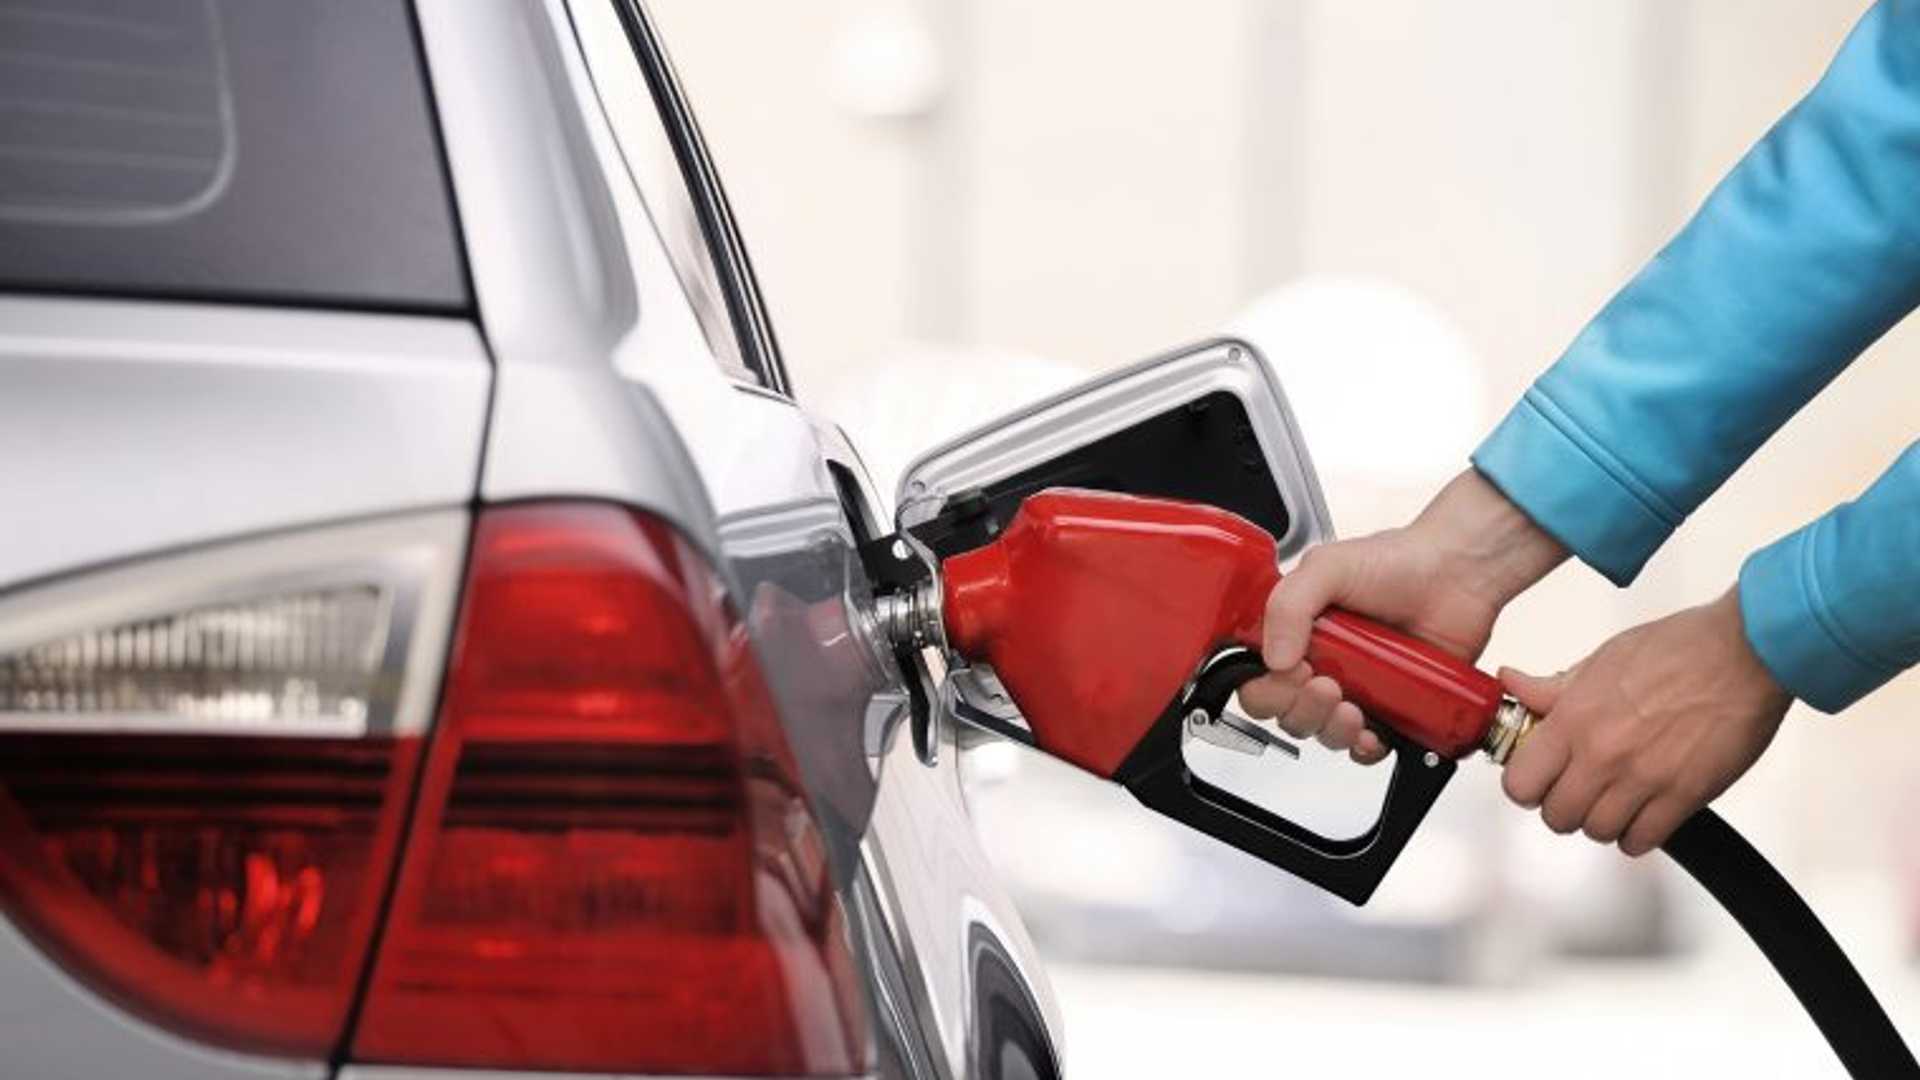 States with the highest Labor Day gas costs